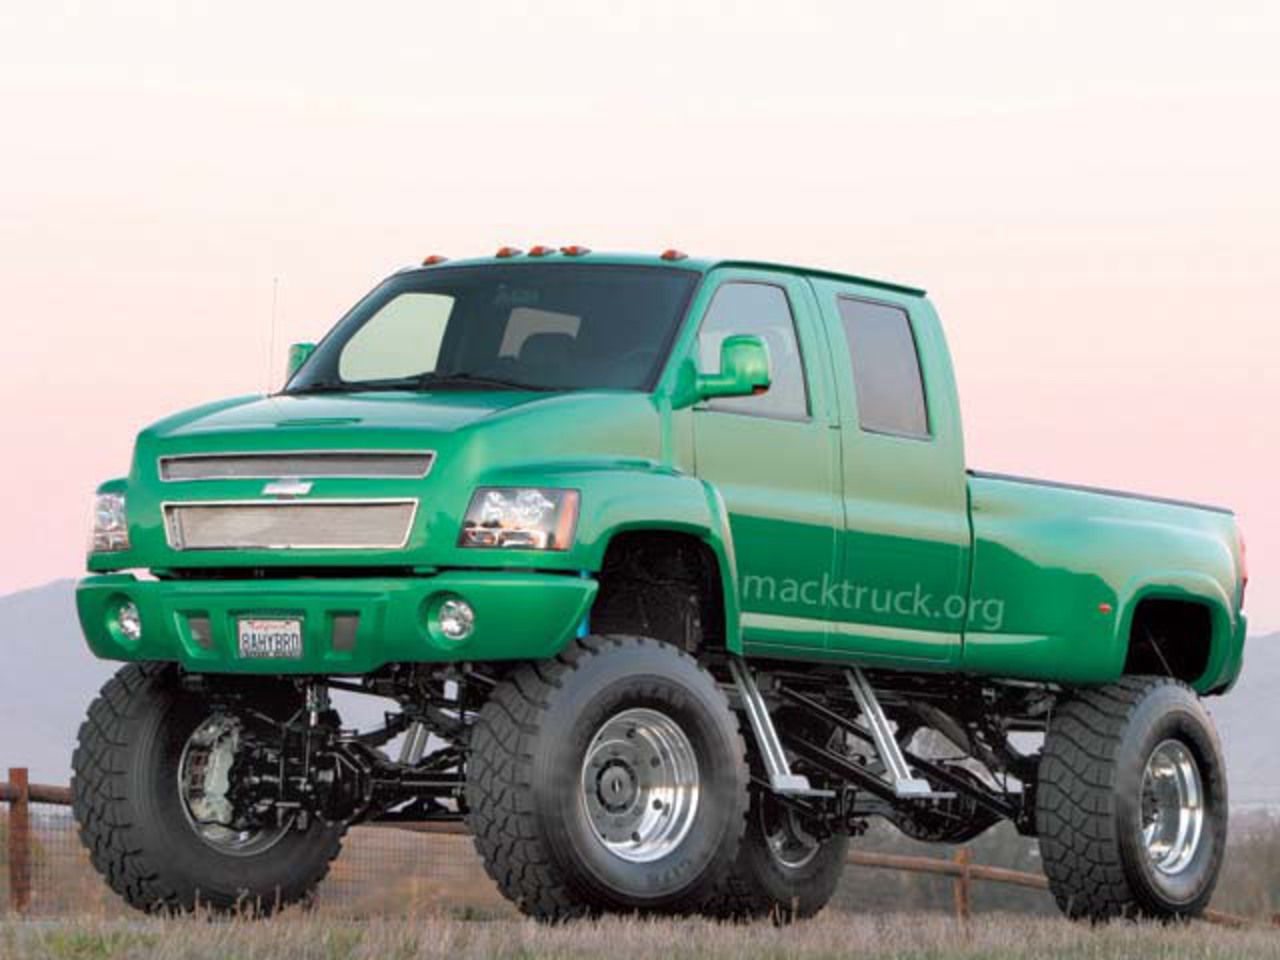 belongs to the same category to which the Ford F-650 and Dodge Ram 6500.